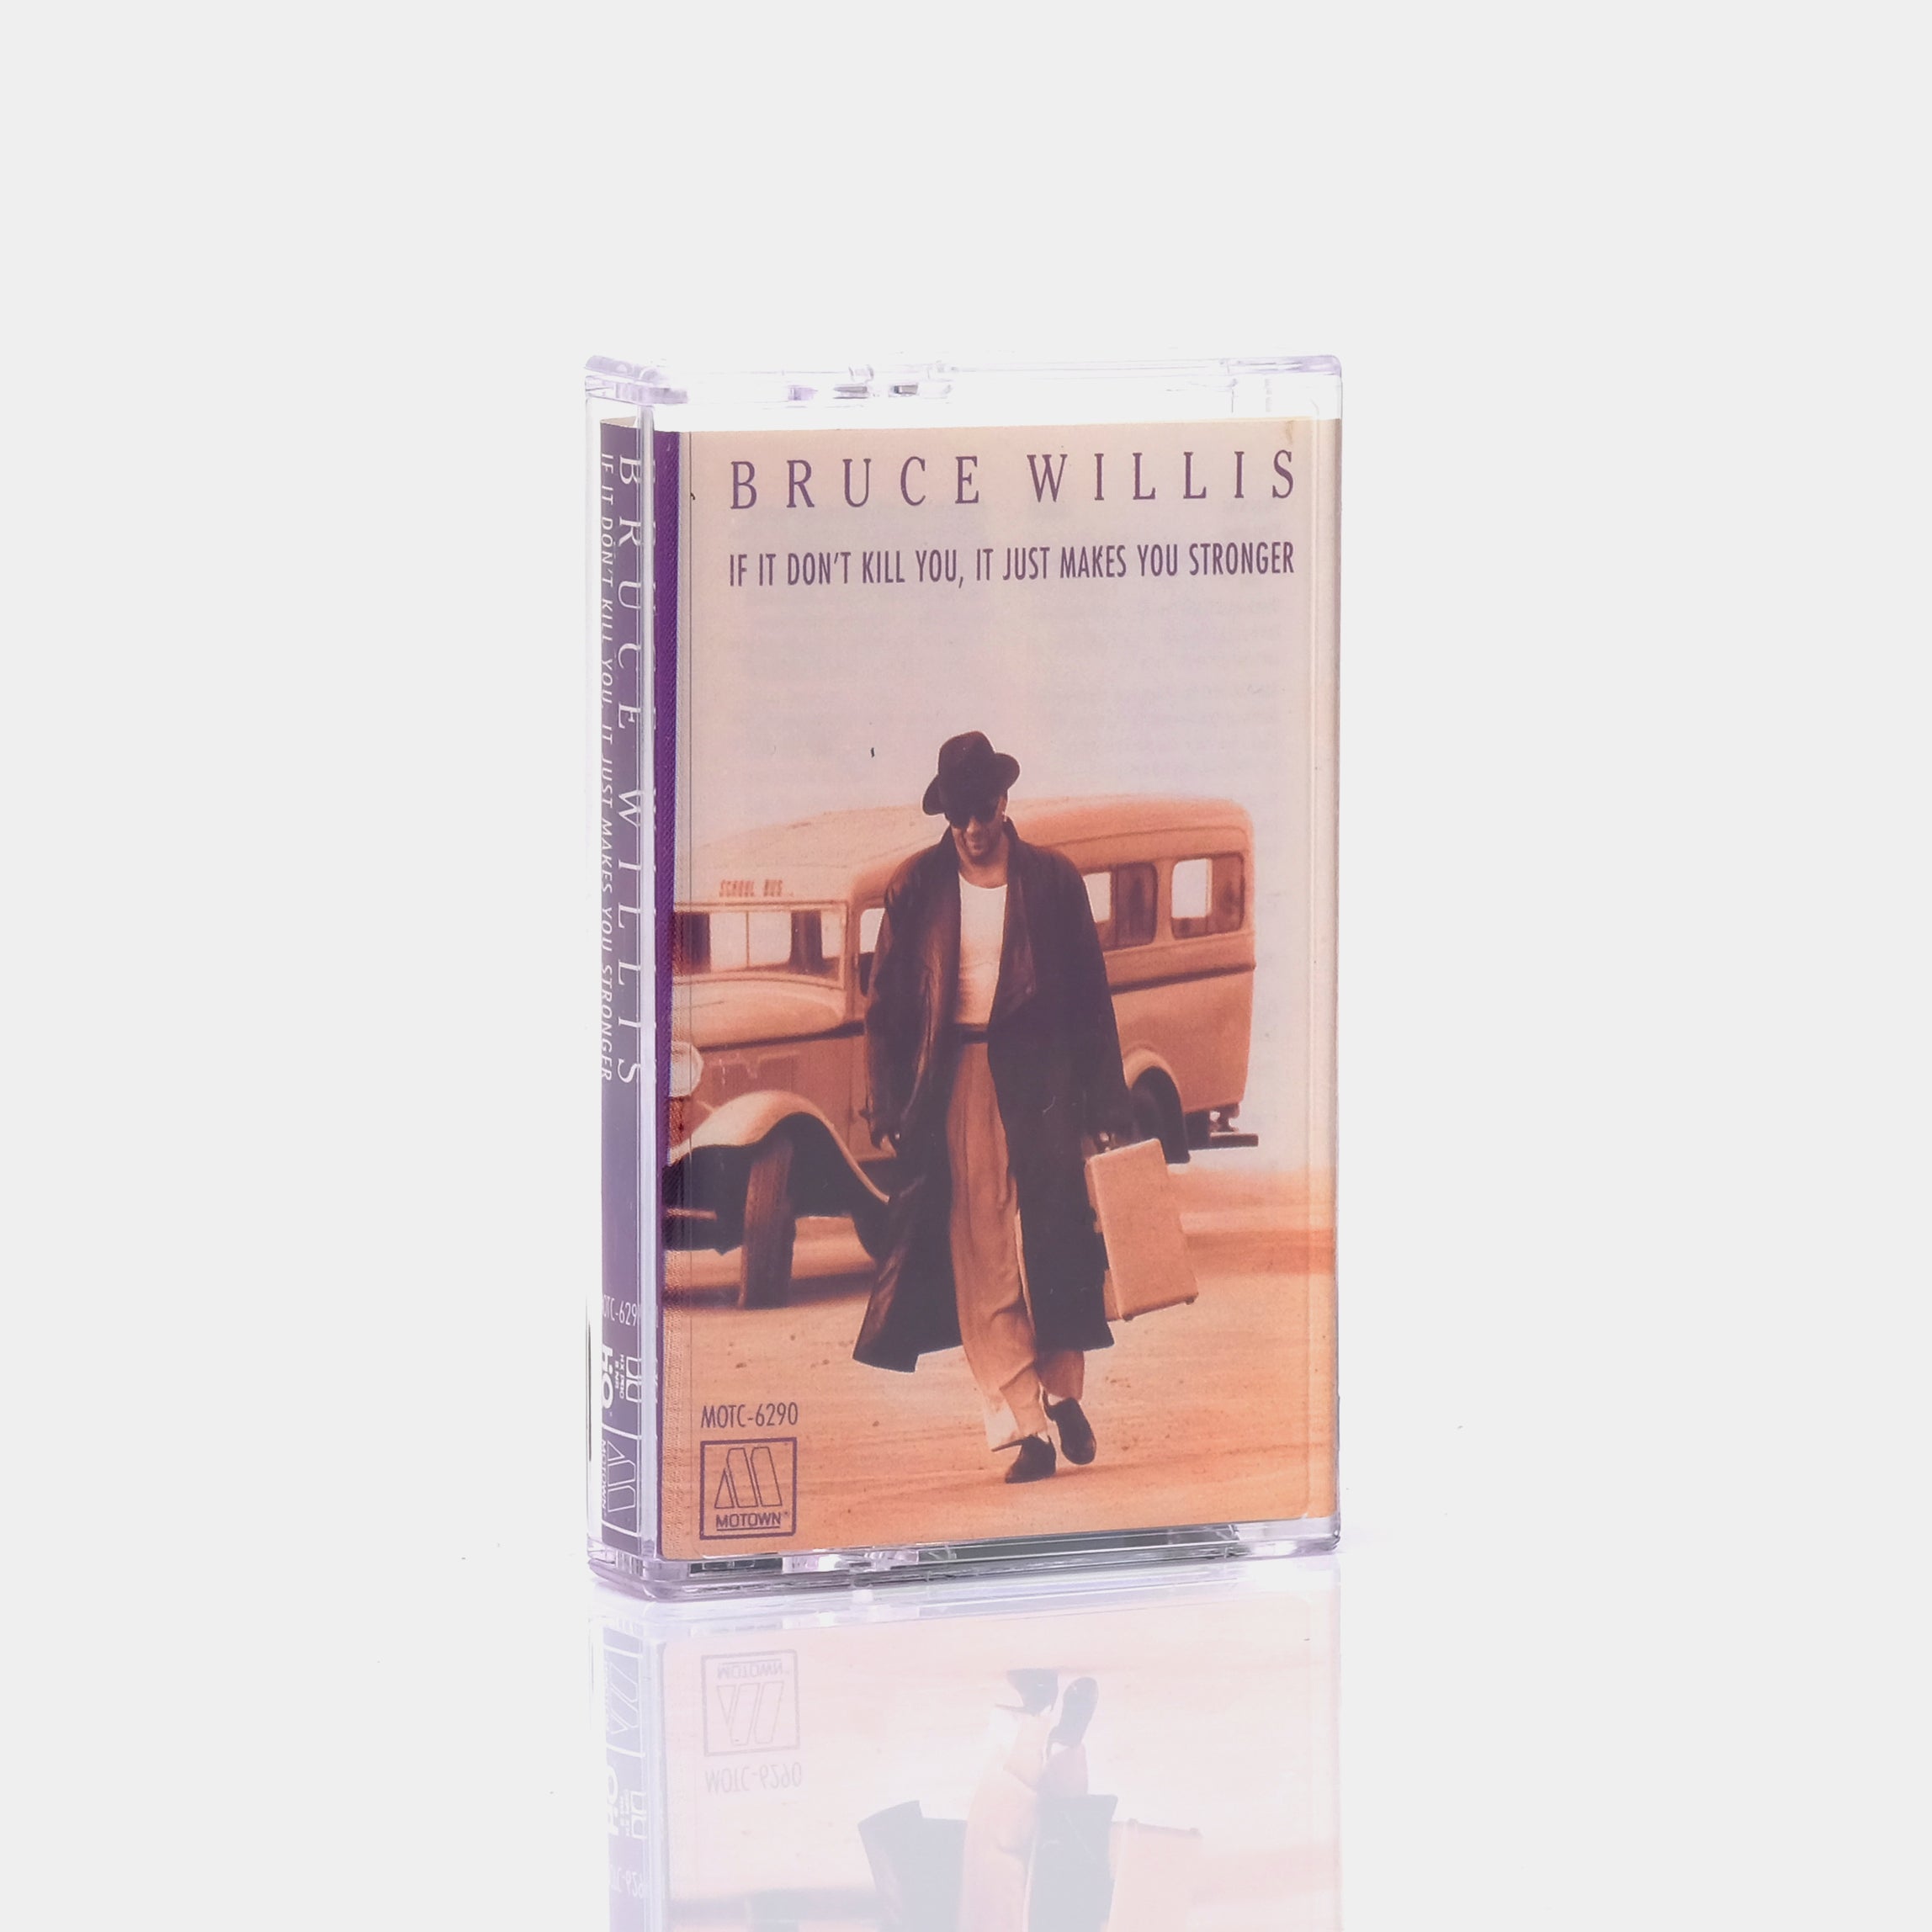 Bruce Willis - If It Don't Kill You, It Just Makes You Stronger Cassette Tape